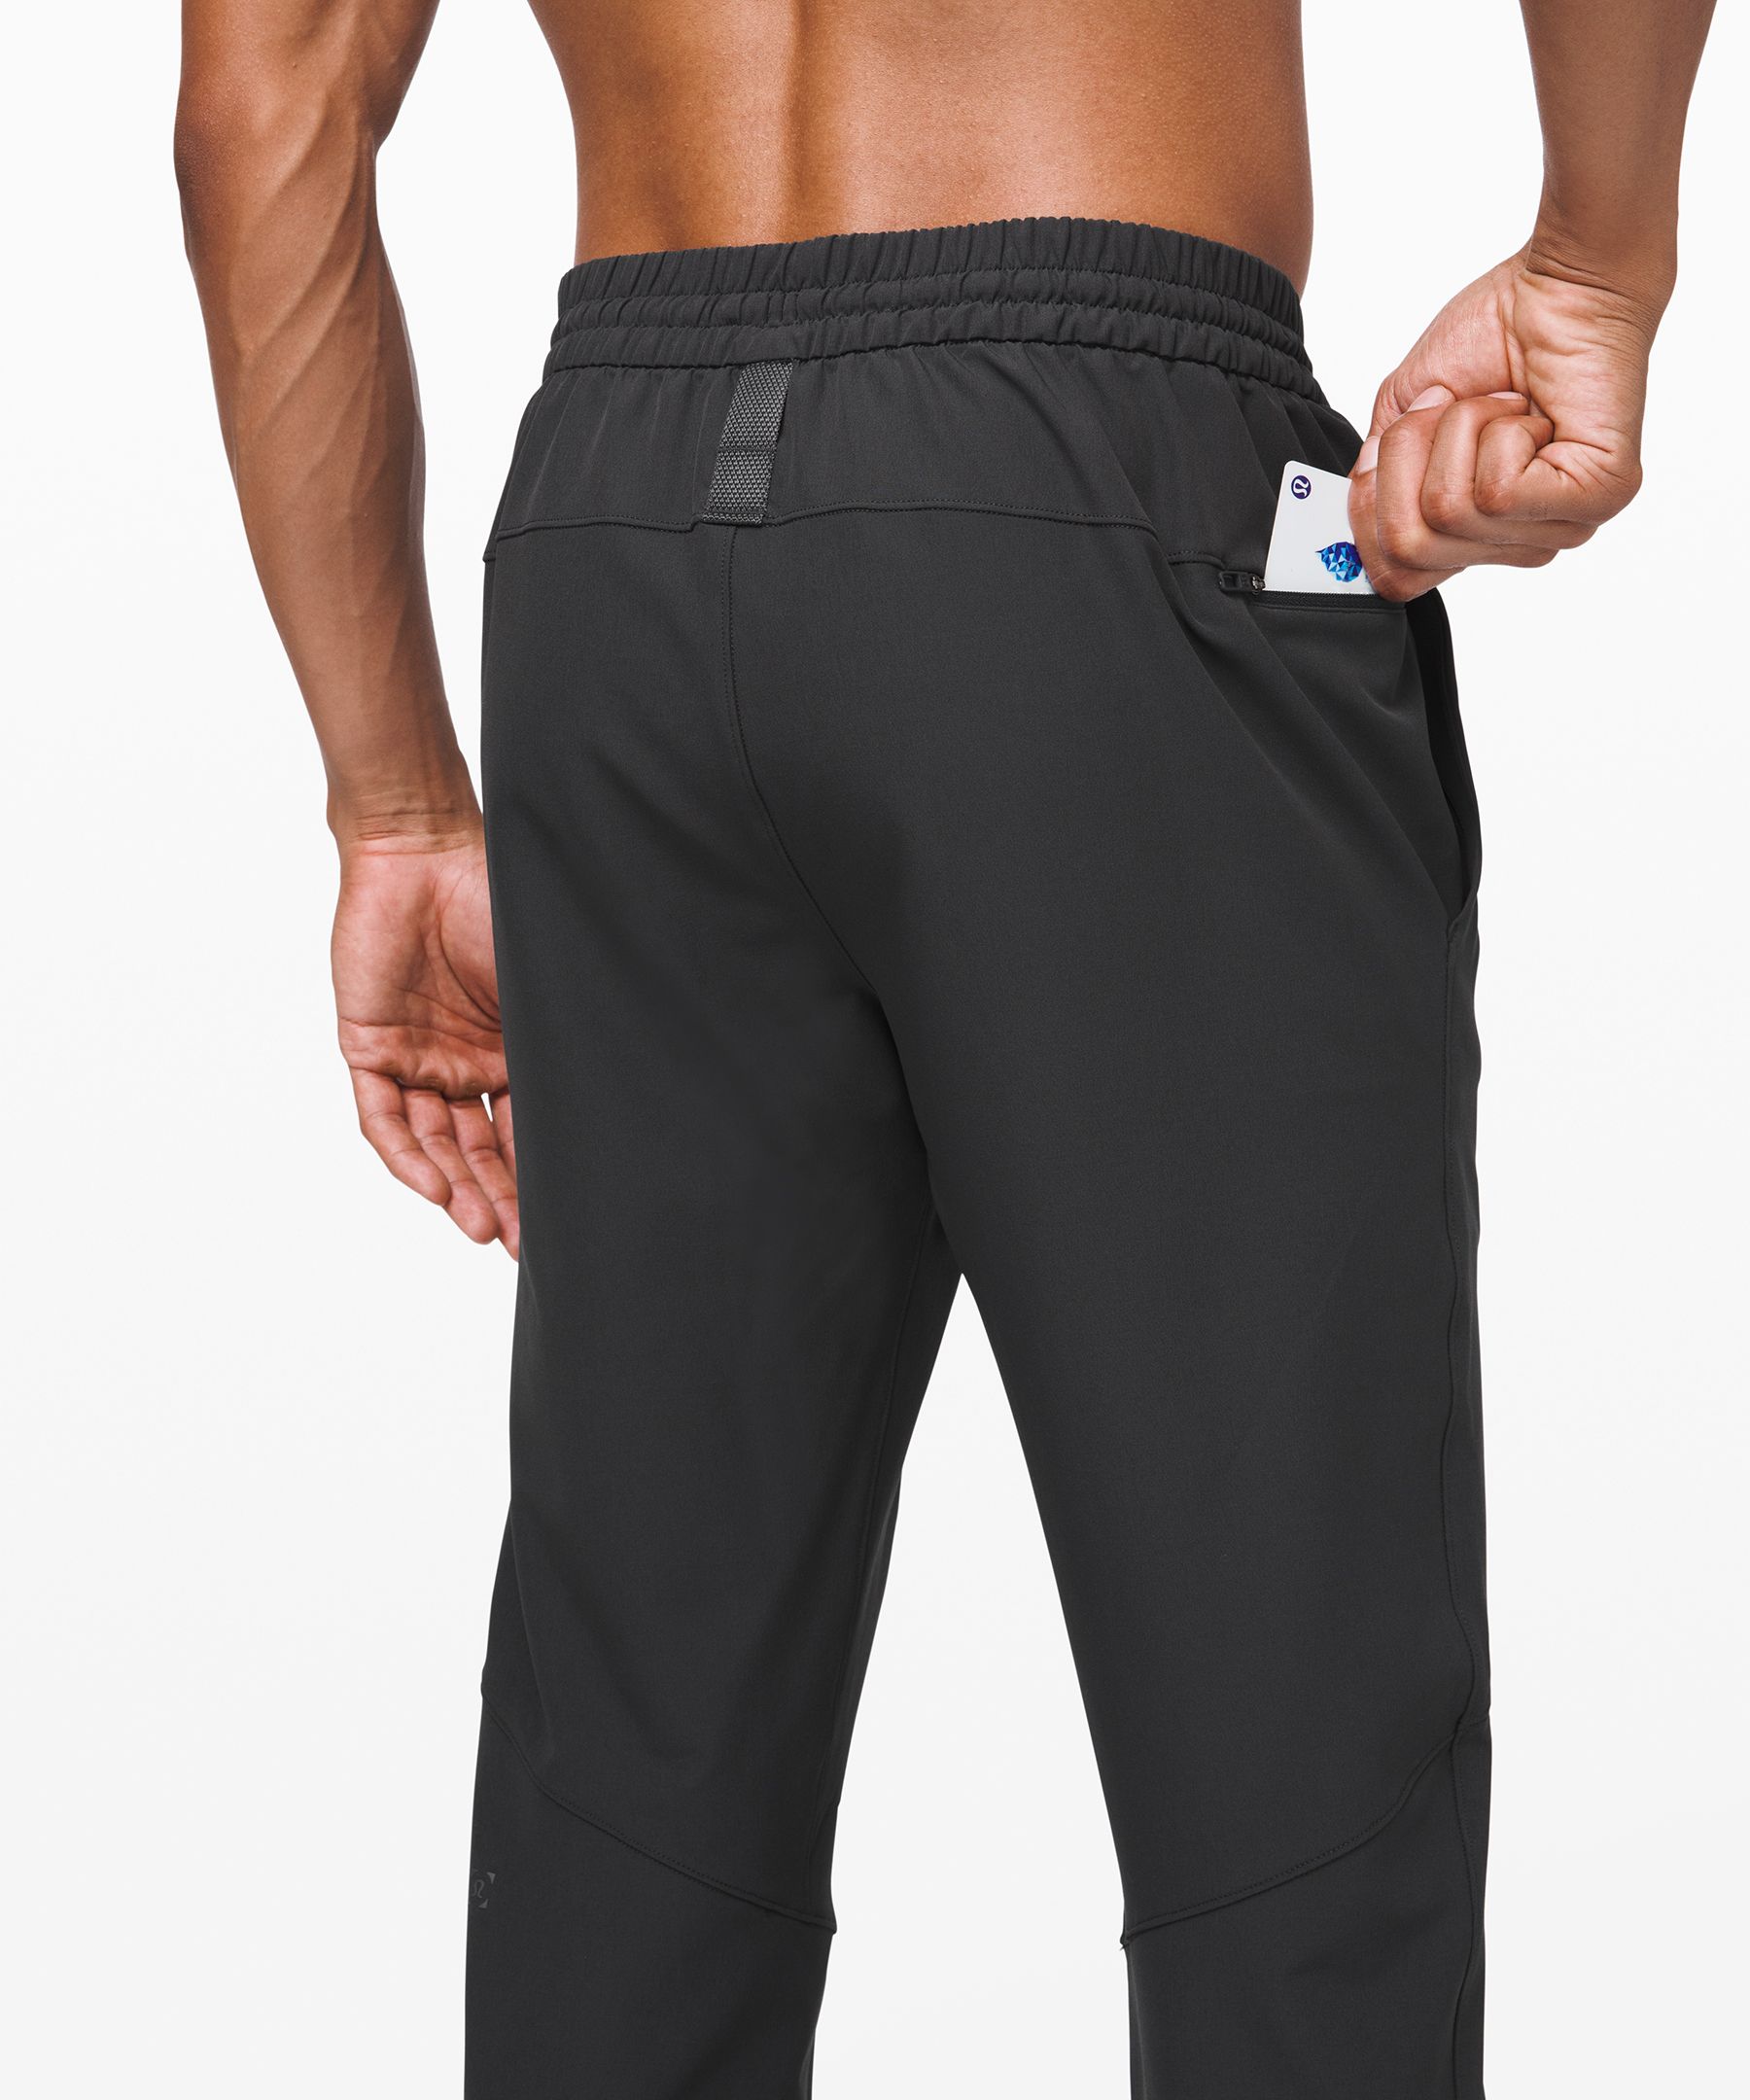 License to Train Pant *Online Only | Lululemon HK